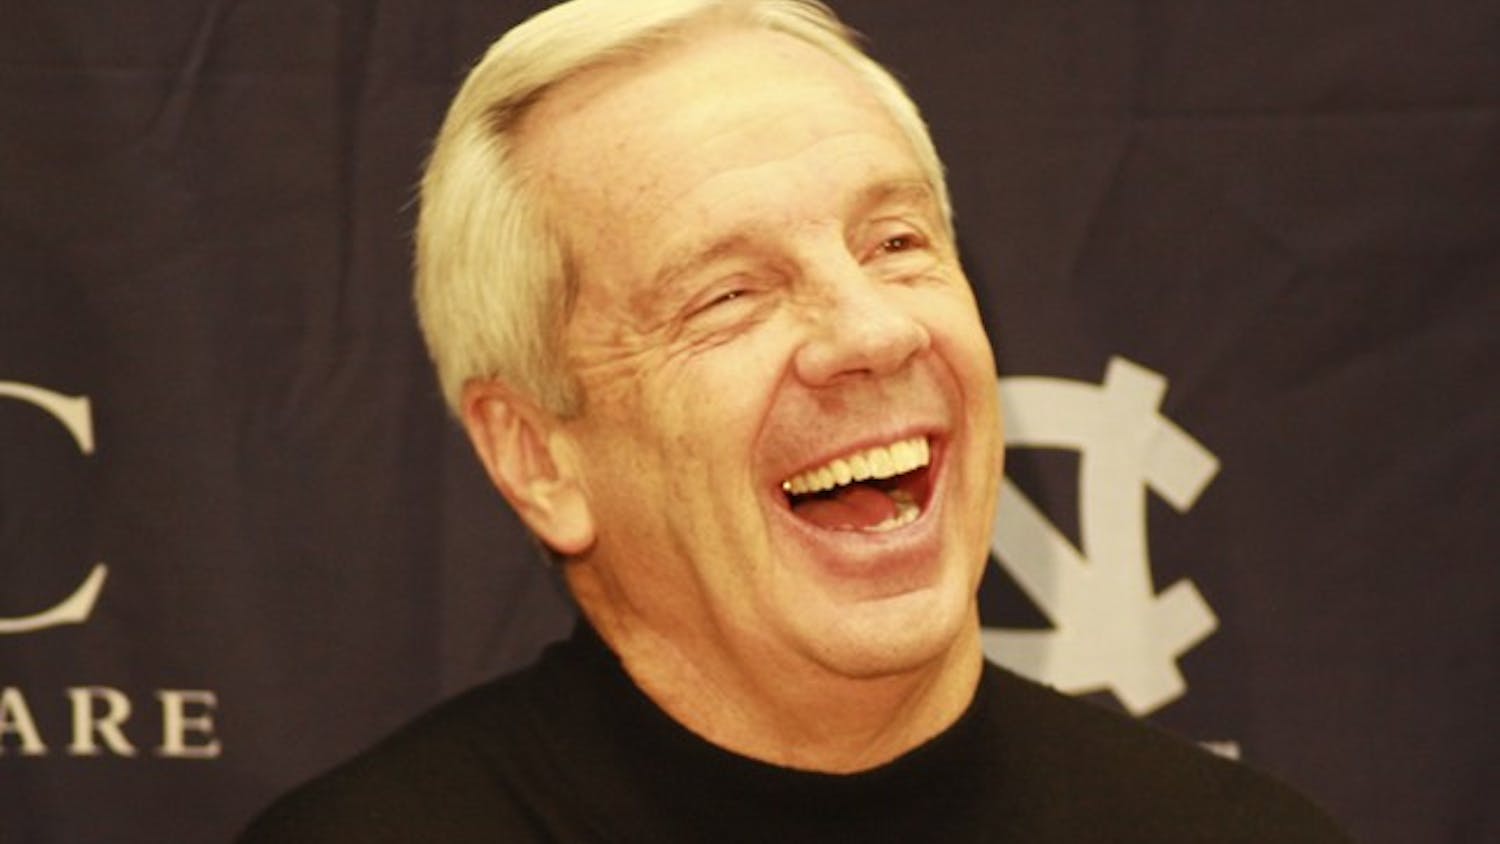 Men’s basketball coach Roy Williams laughs at a press conference on Wednesday in advance of UNC’s game vs. Virginia Tech on Thursday.